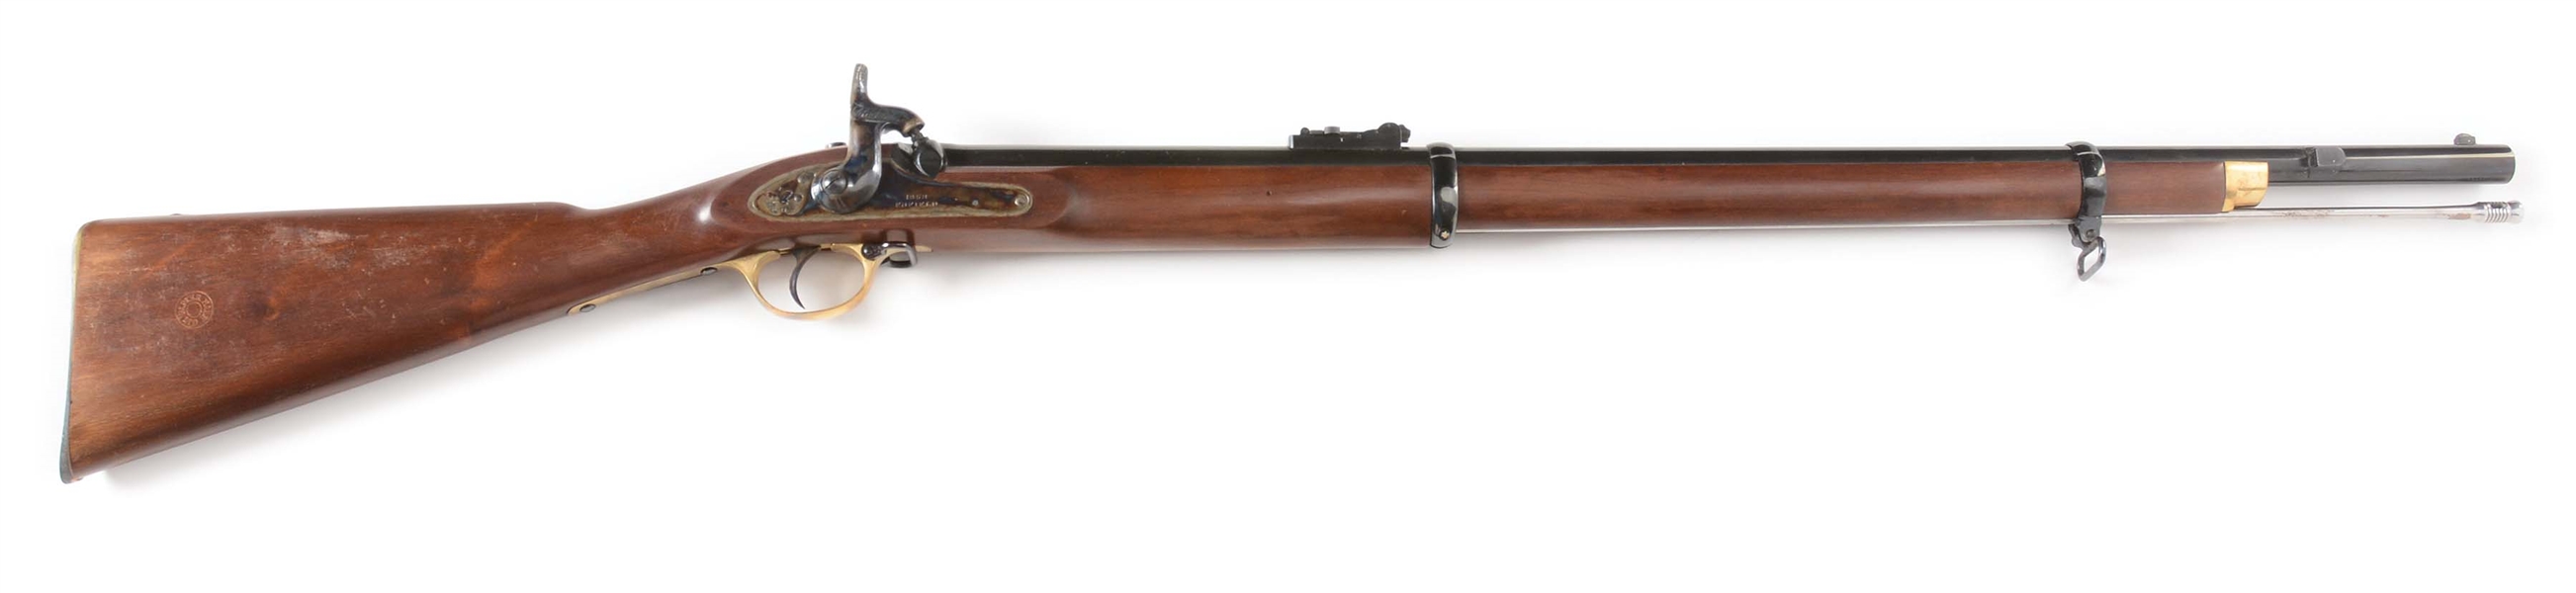 (A) NAVY ARMS WHITWORTH PERCUSSION RIFLE.